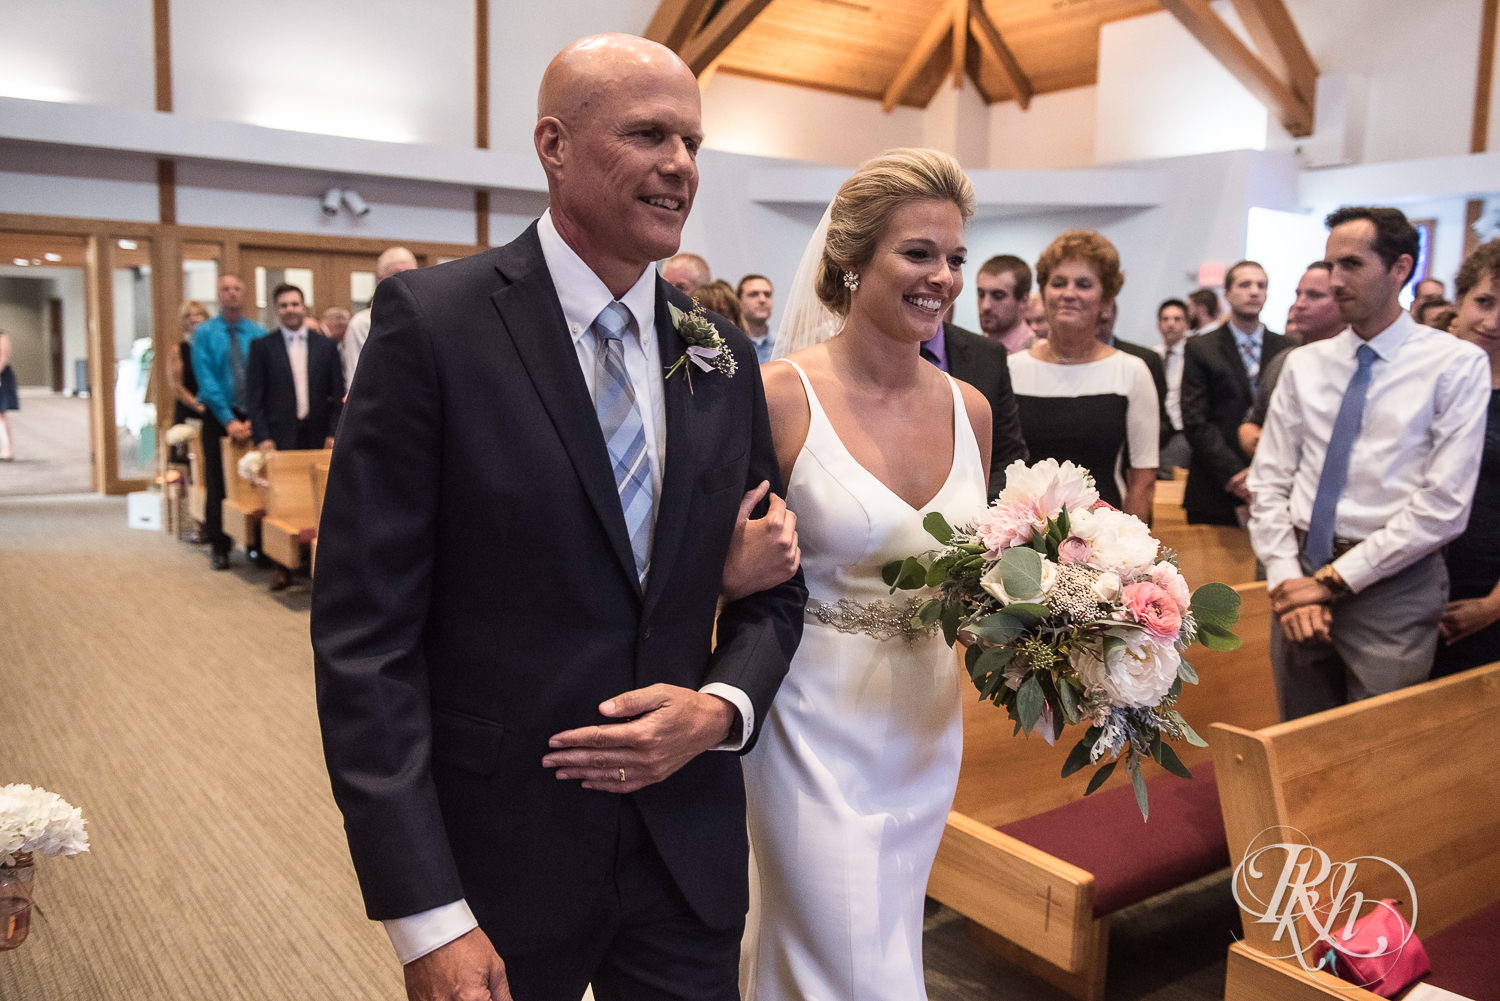 Bride and her dad walk down the aisle during a church wedding ceremony in Minneapolis, Minnesota.